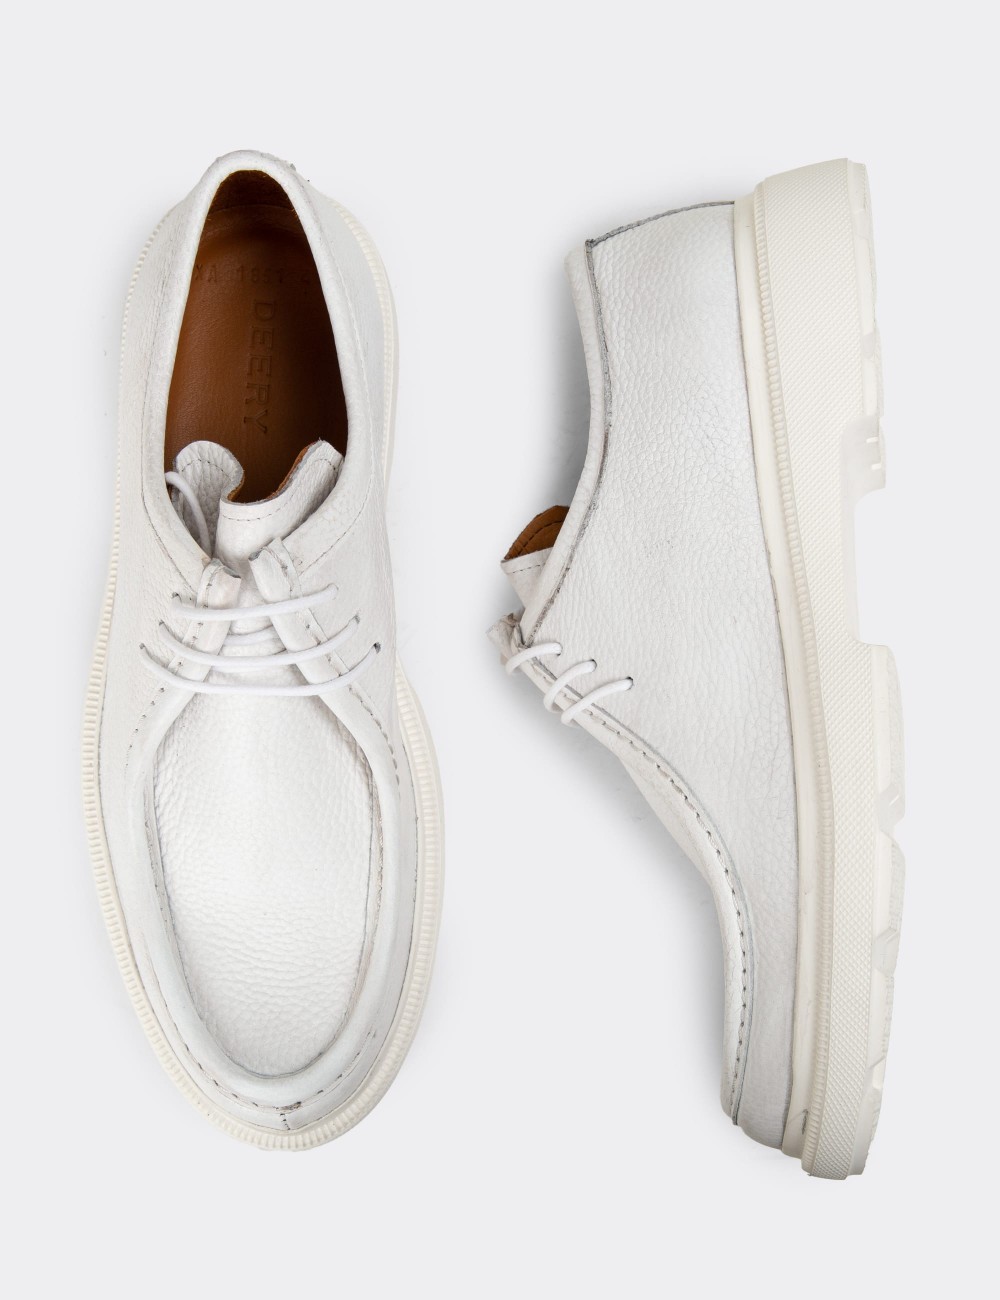 White Leather Lace-up Shoes - 01851MBYZP01